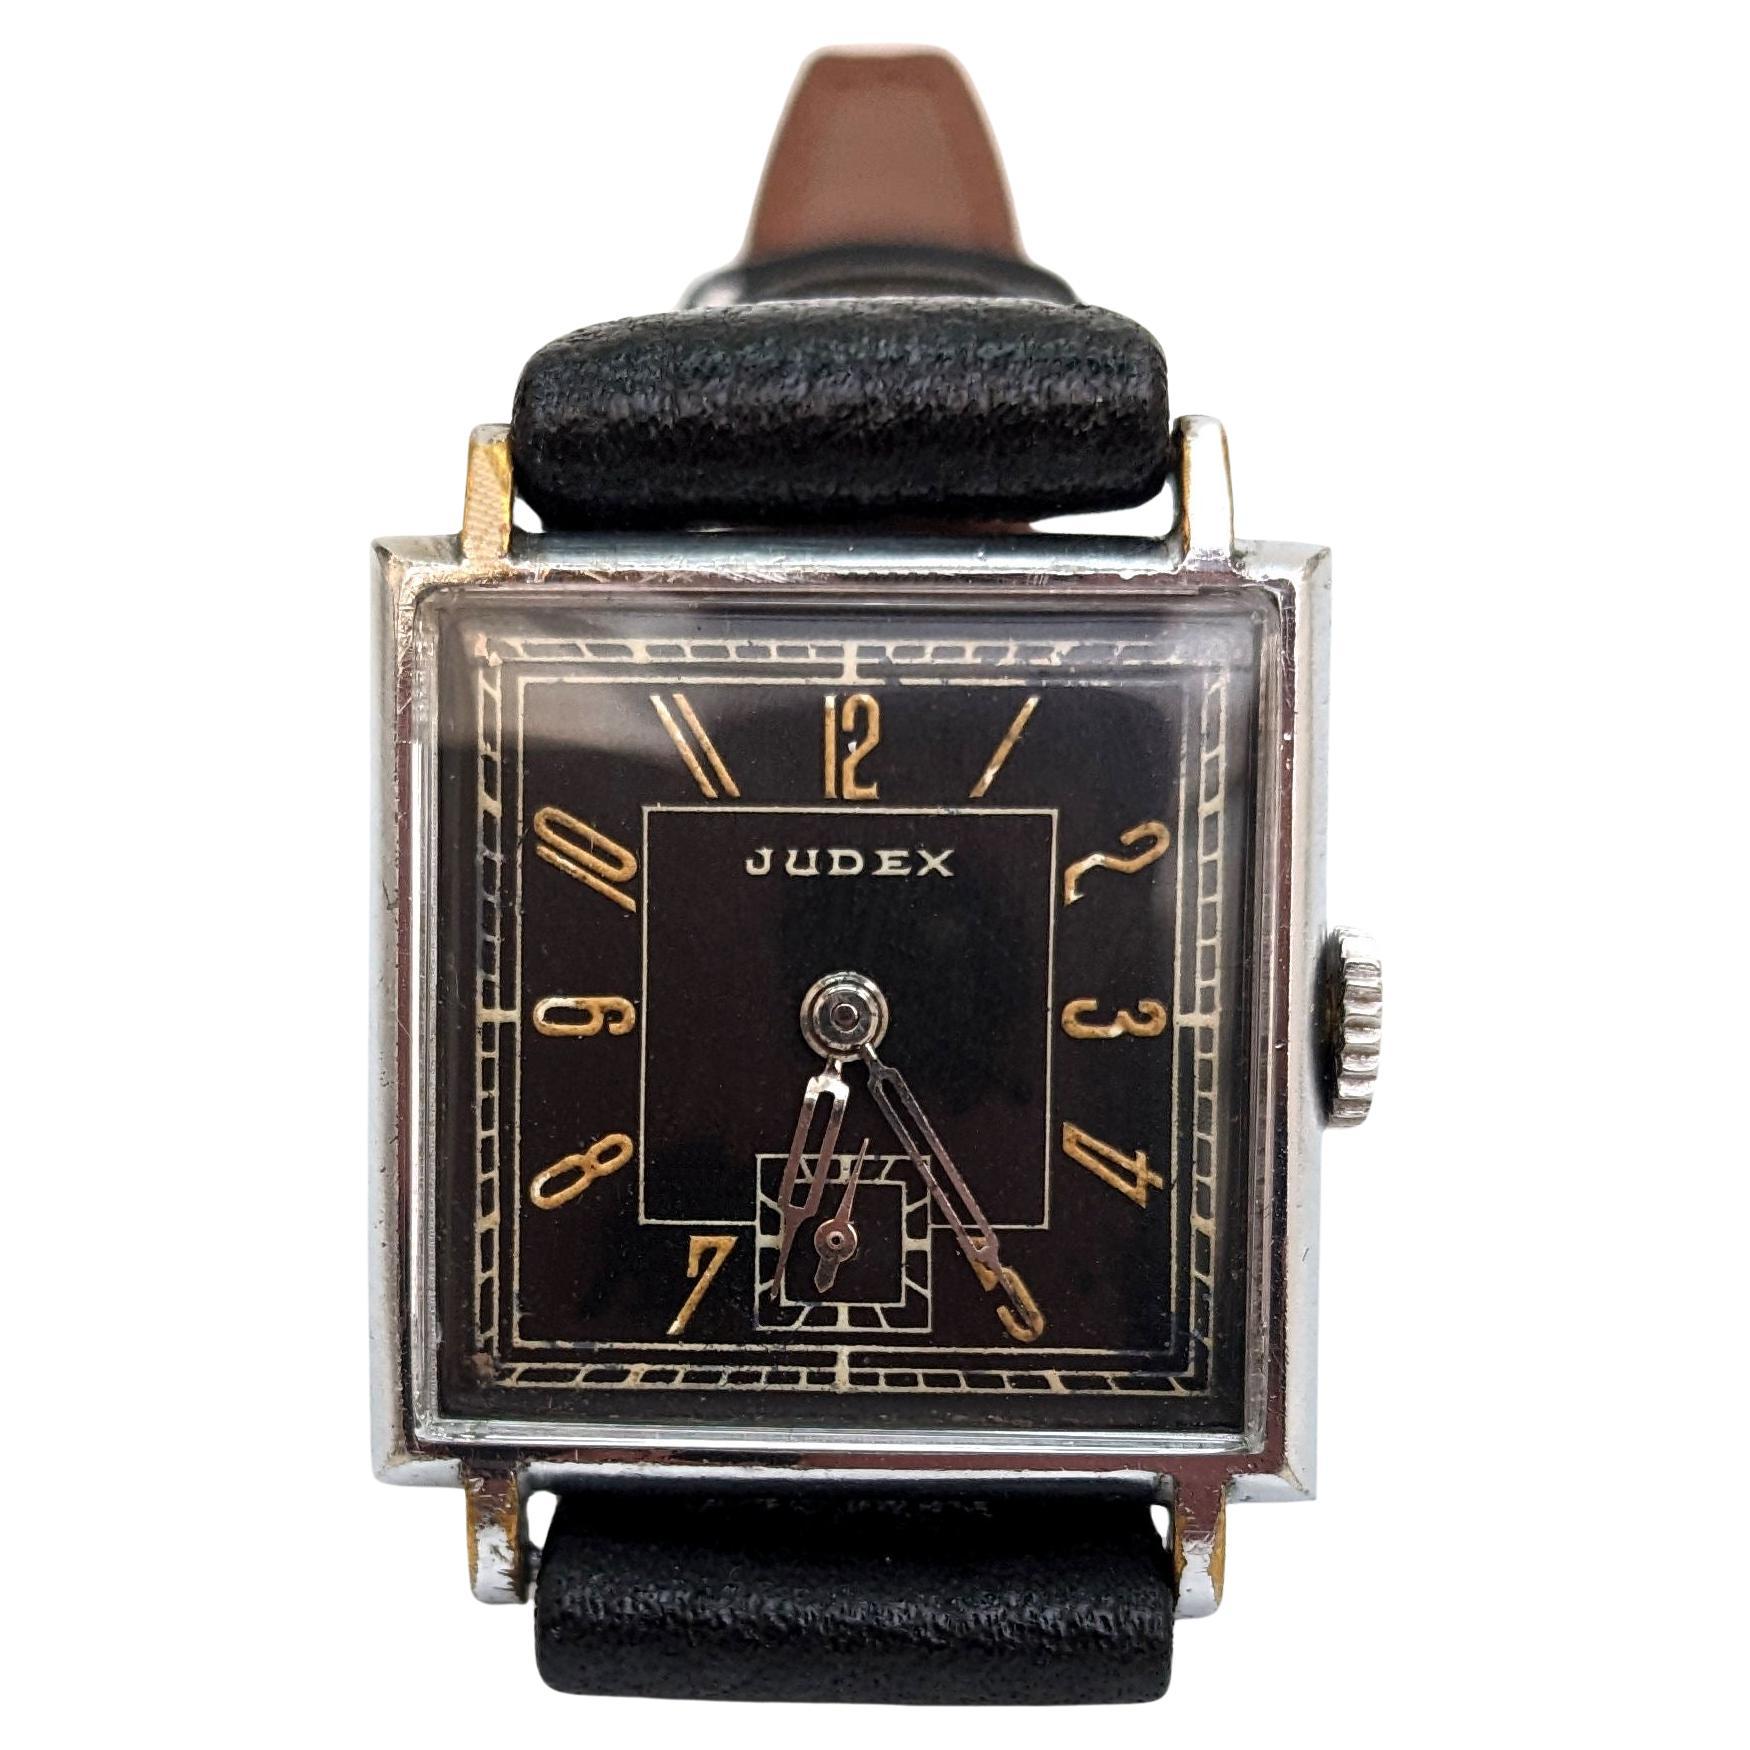 Art Deco Gents Manual Wrist Watch By Judex, c1930s For Sale